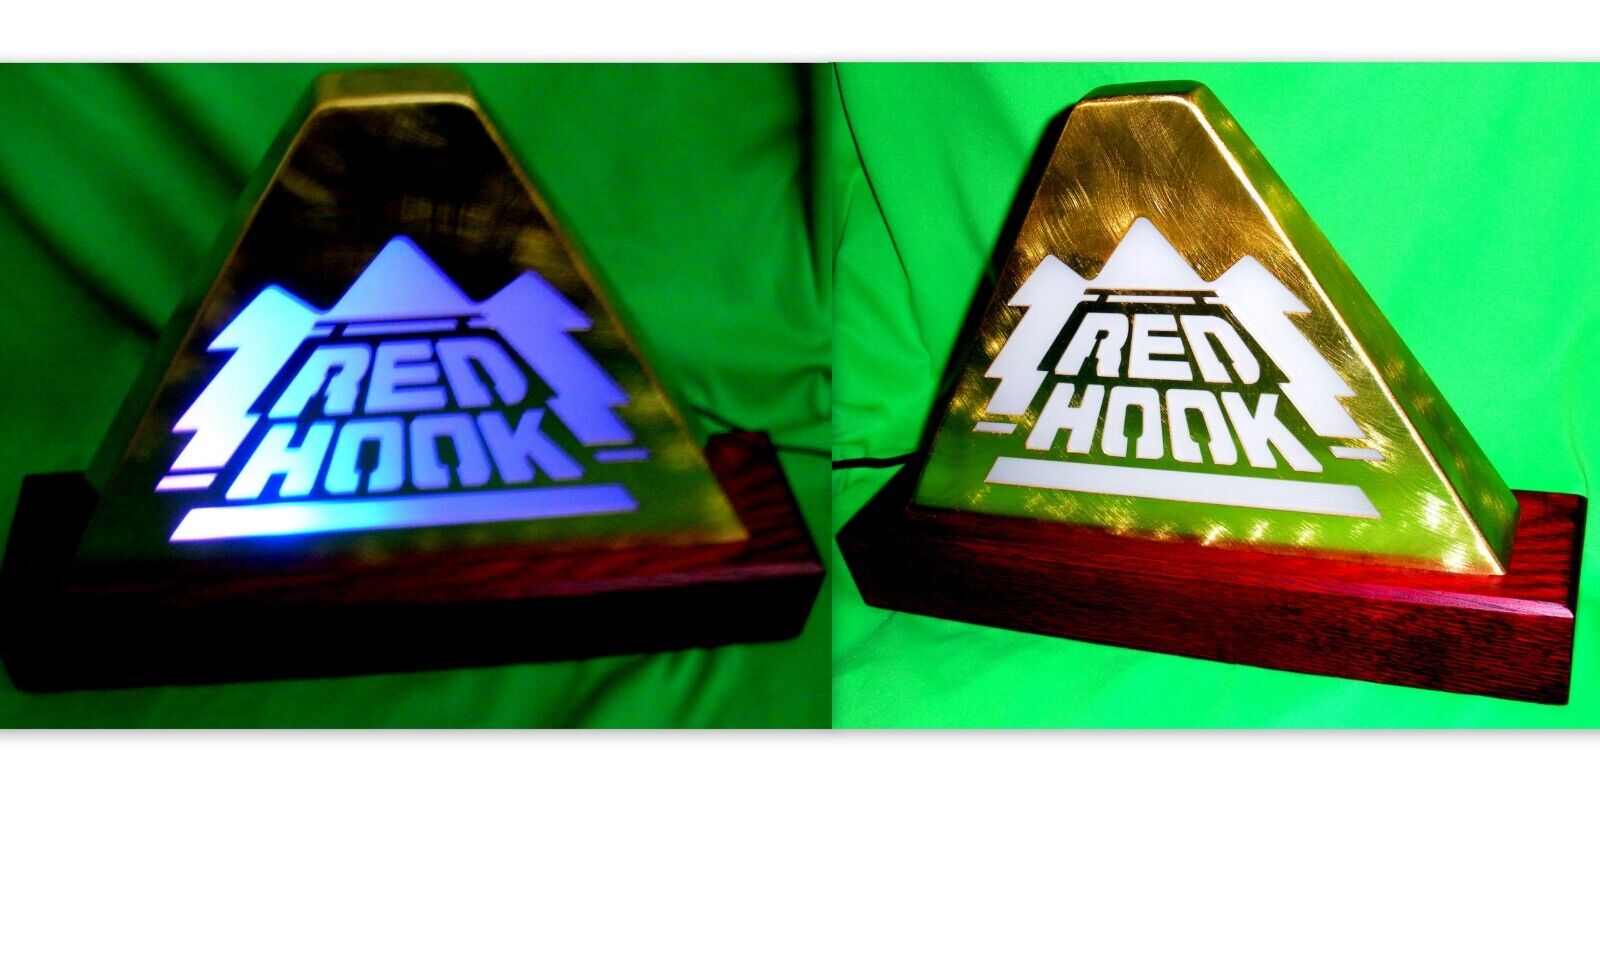 Awesome Multi-colored RED HOOK Light Up Beer Sign Man Cave Must Have Cool